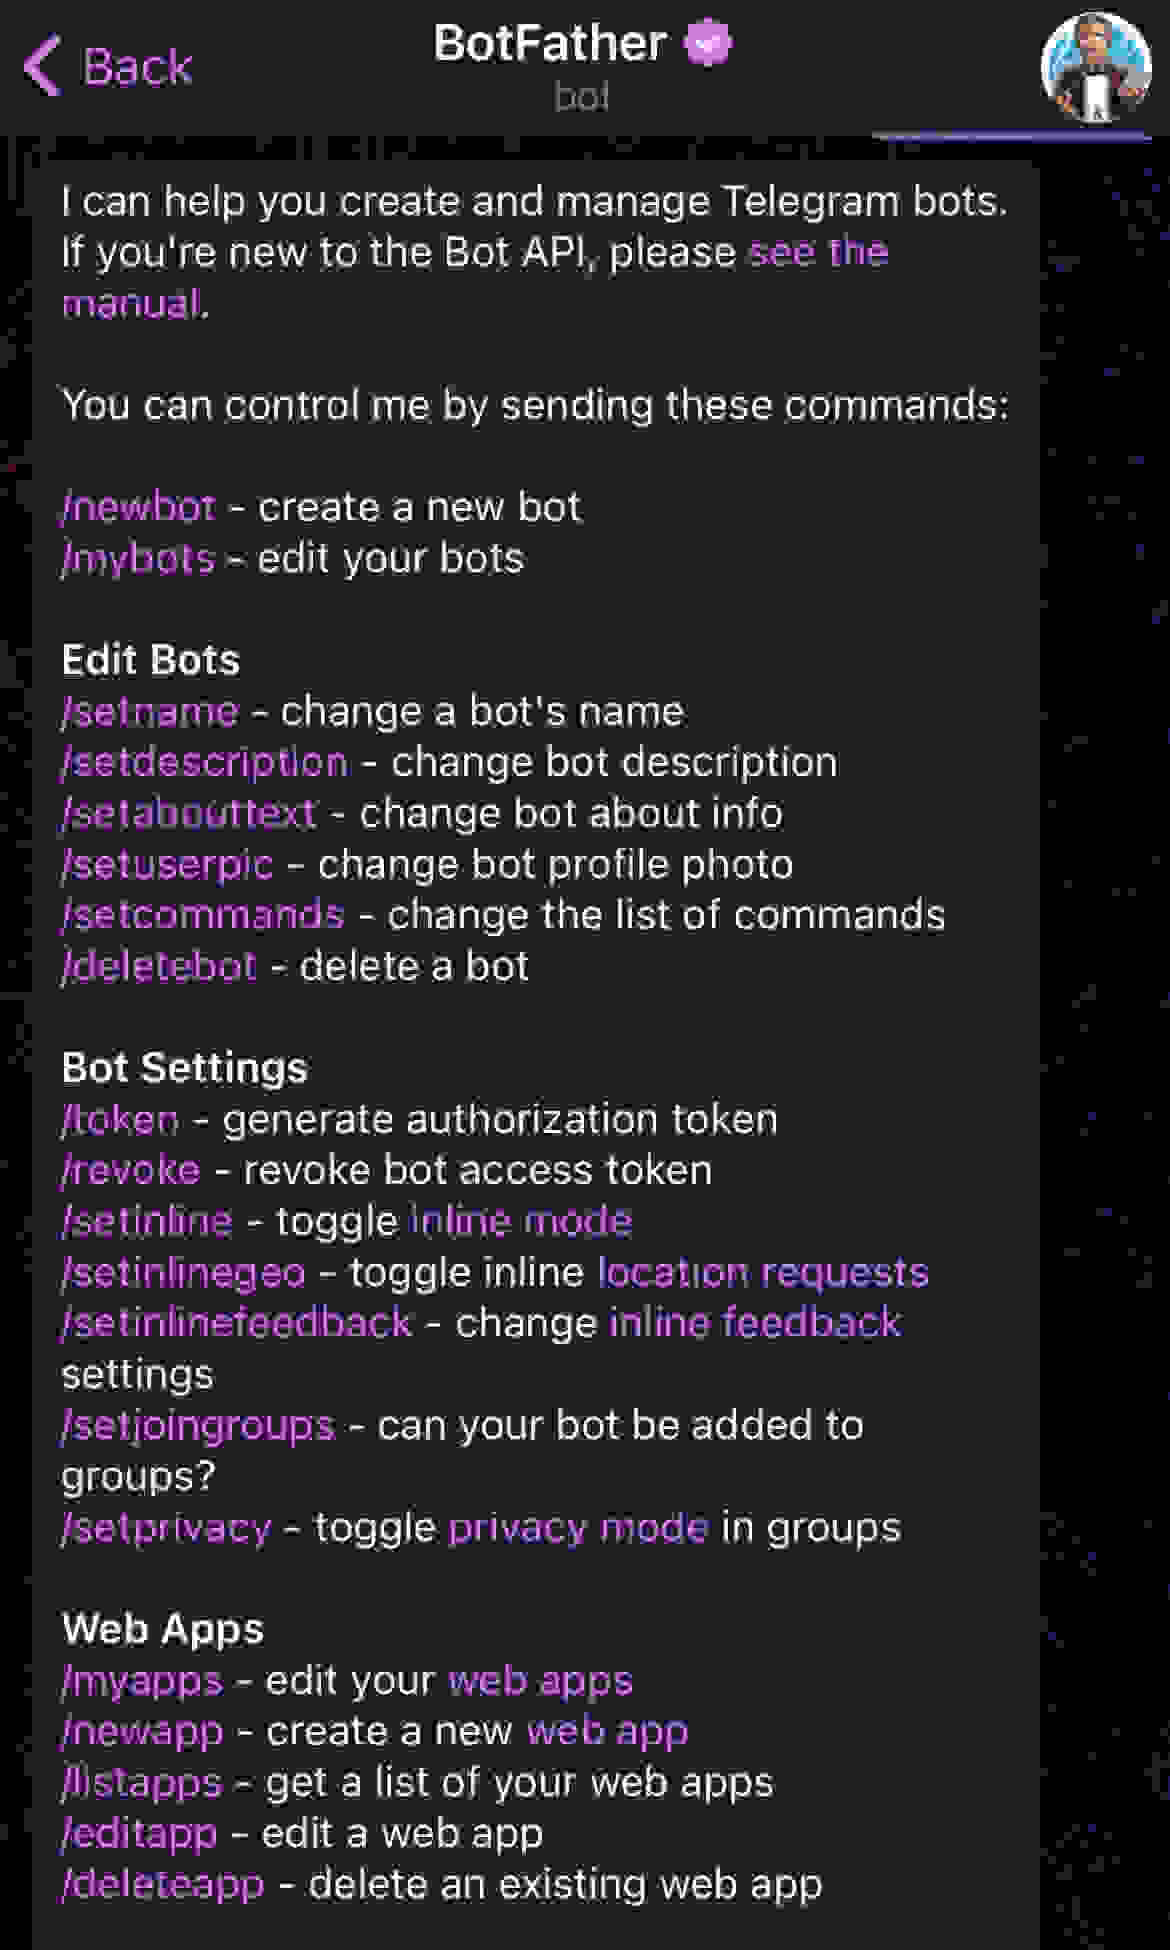 The bot allows the execution of various operations, and we're interested in creating our own bot. Click on the first available command, which is /newbot.